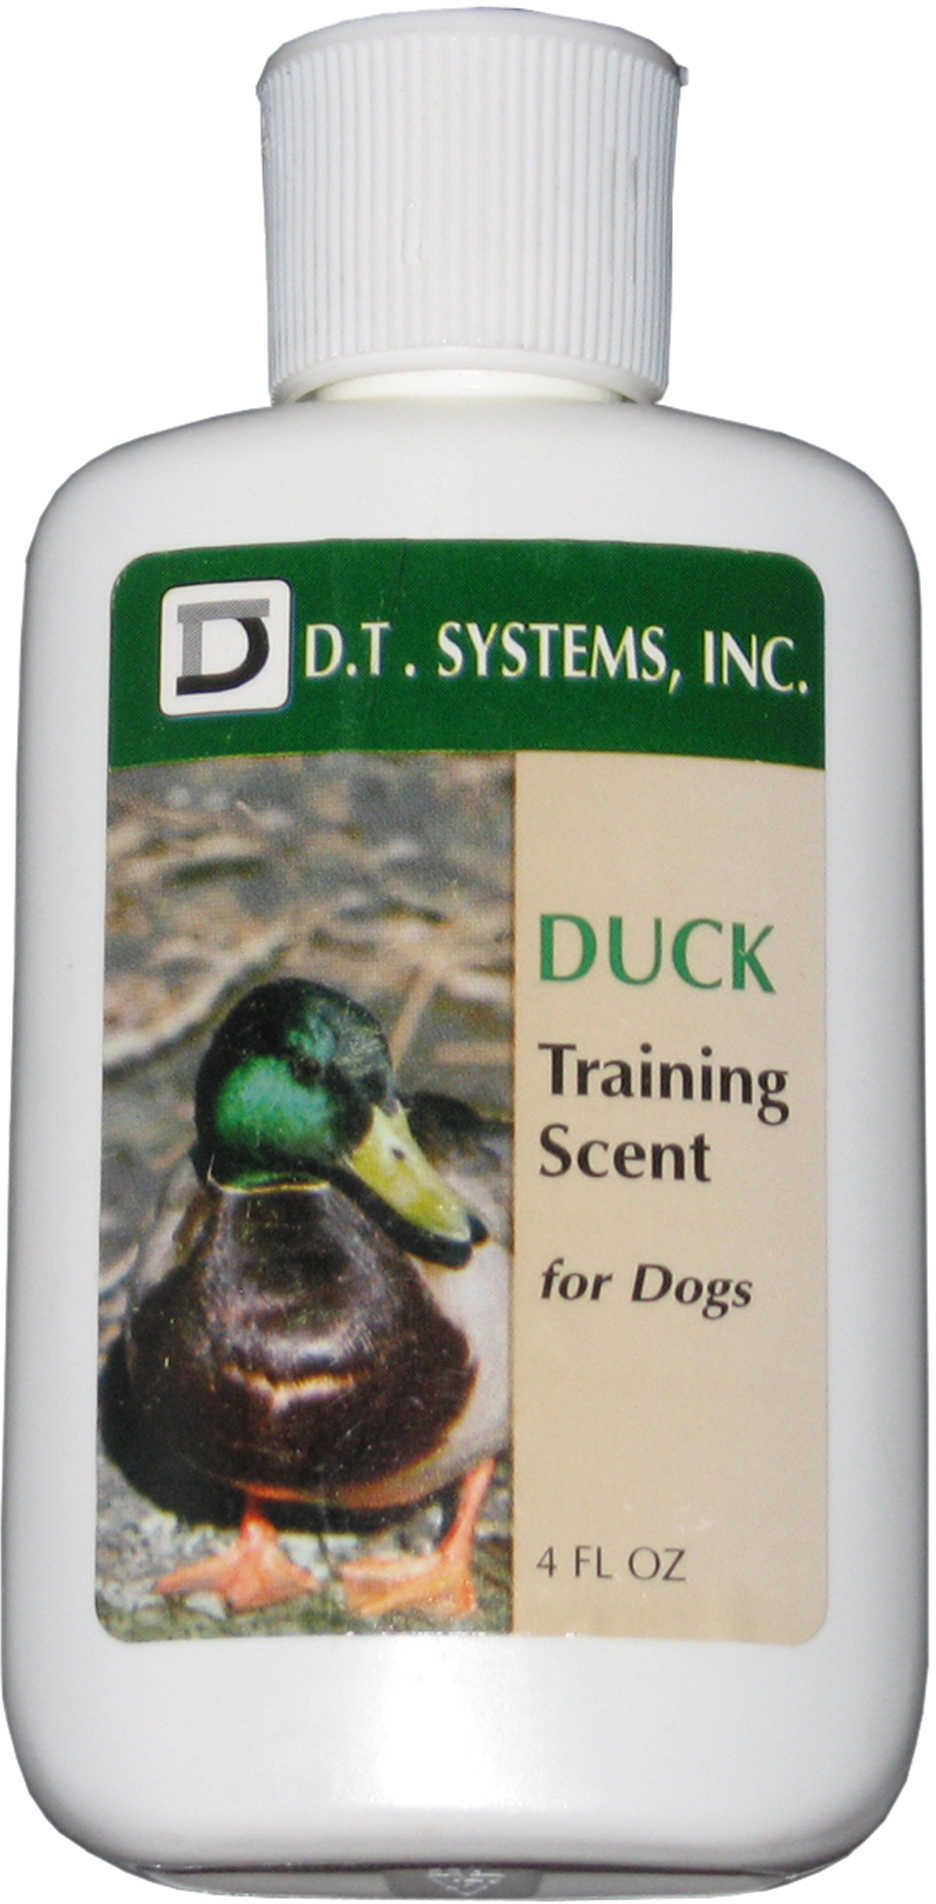 DT Systems Dog Training Scent Duck 4 oz. 75202